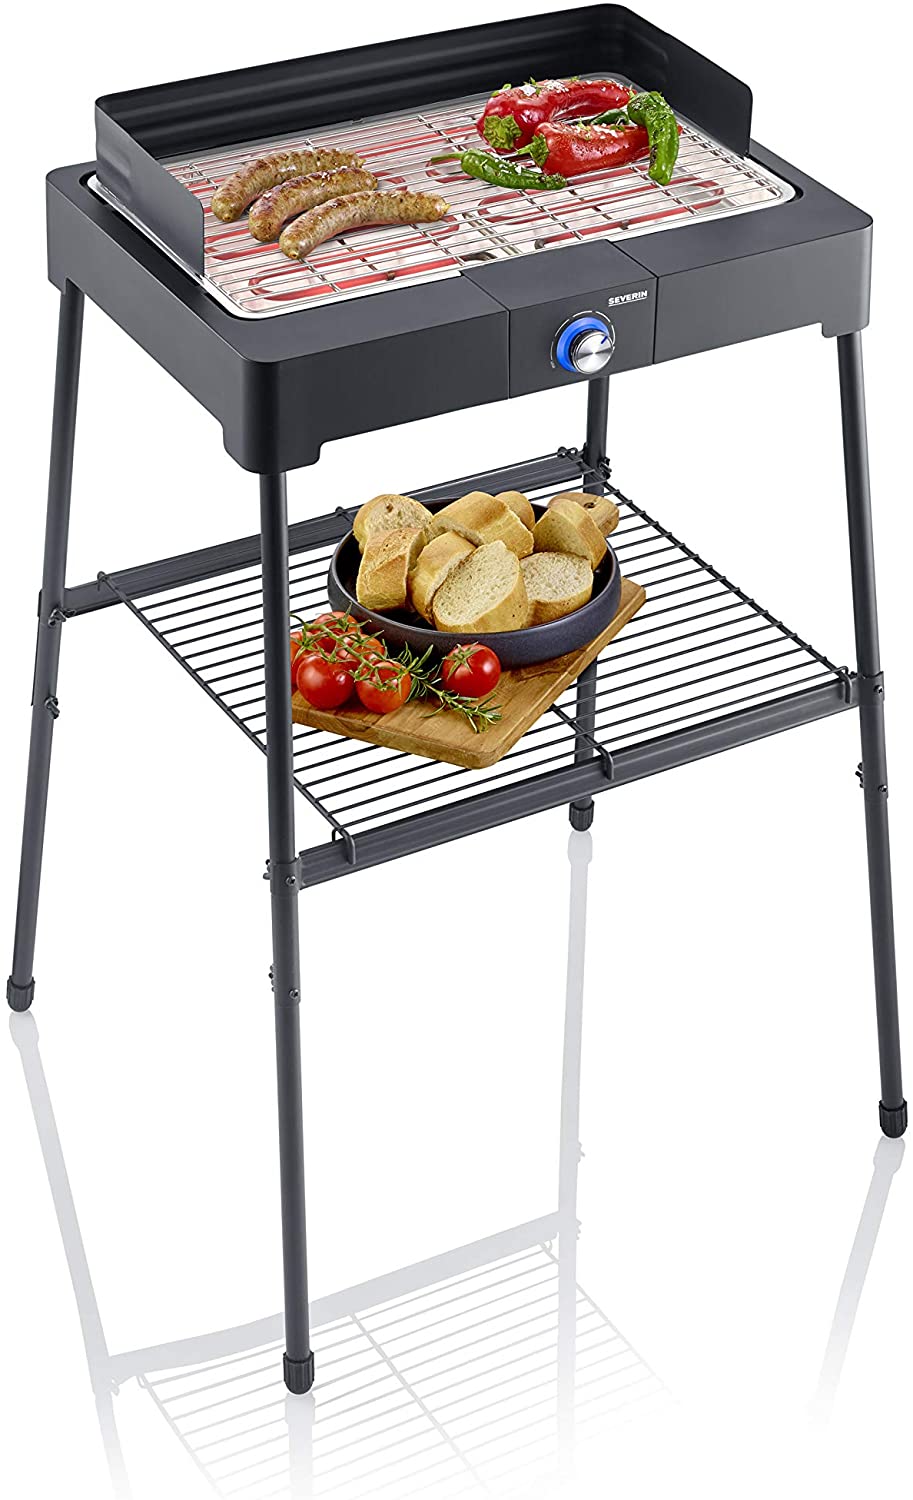 Severin 8561 2200 Barbecue With Grill-Black